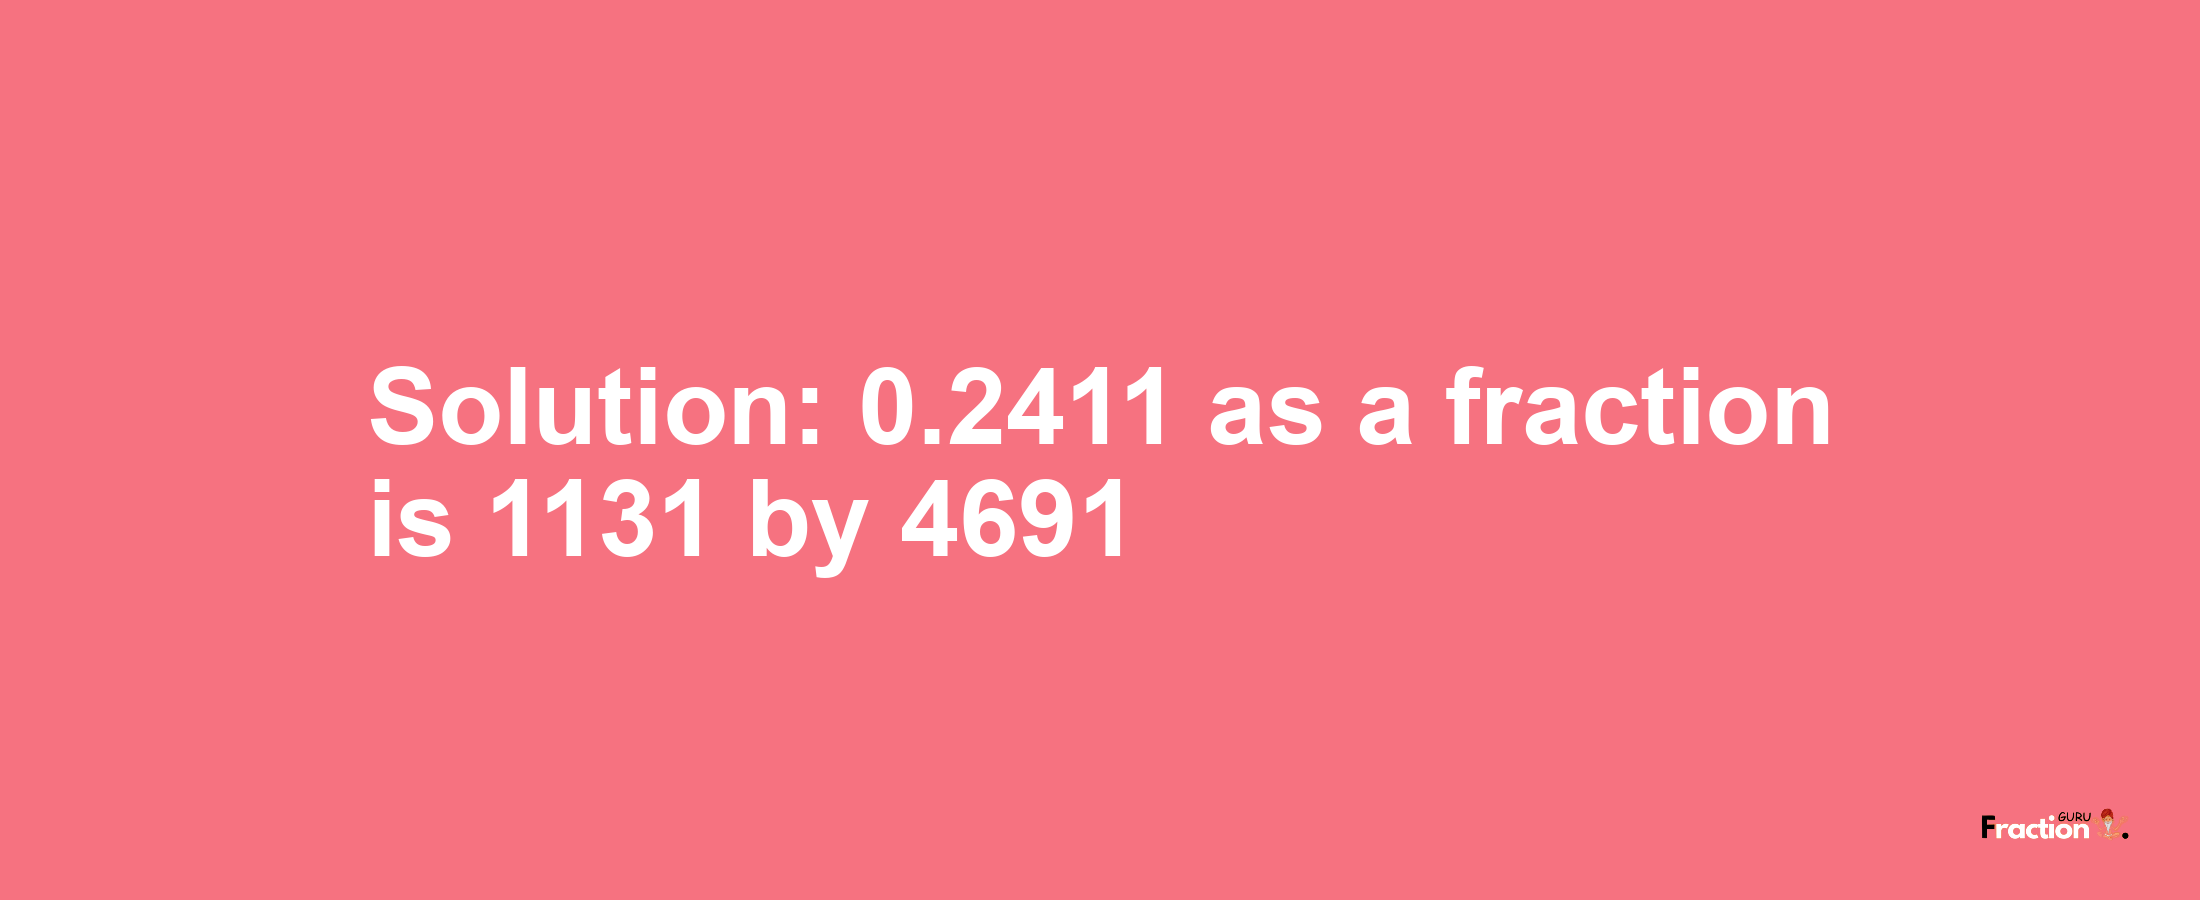 Solution:0.2411 as a fraction is 1131/4691